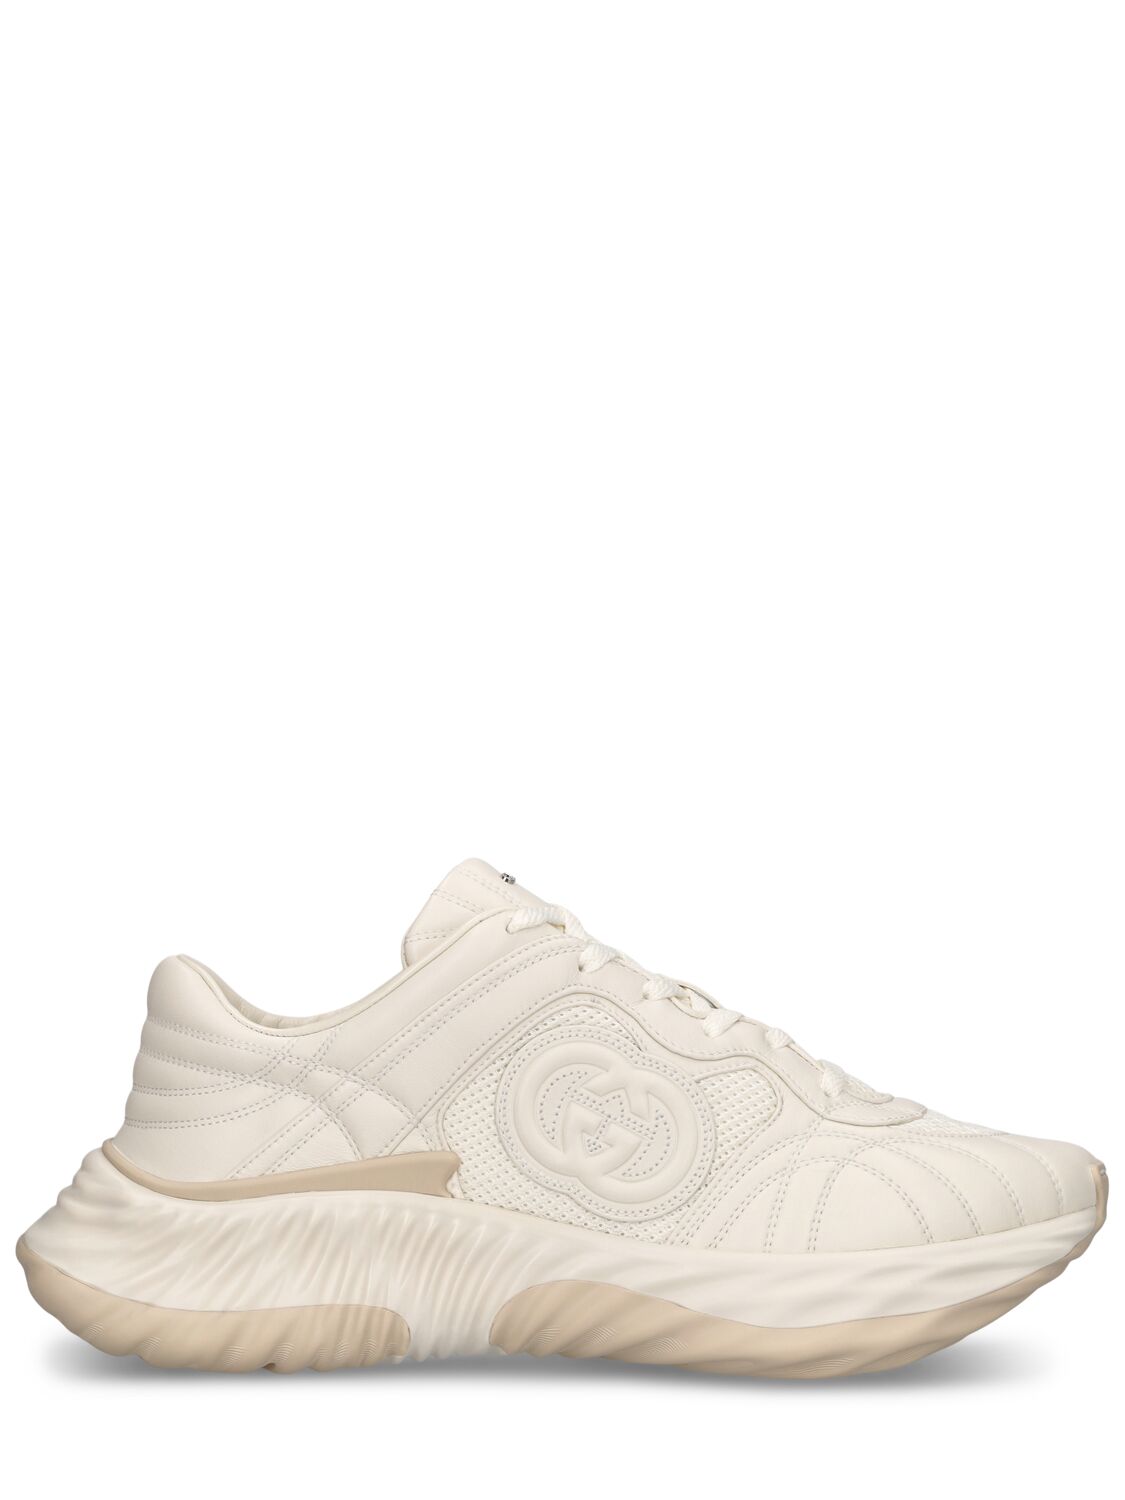 Gucci 65mm Interlocking G Leather Sneakers In Off White